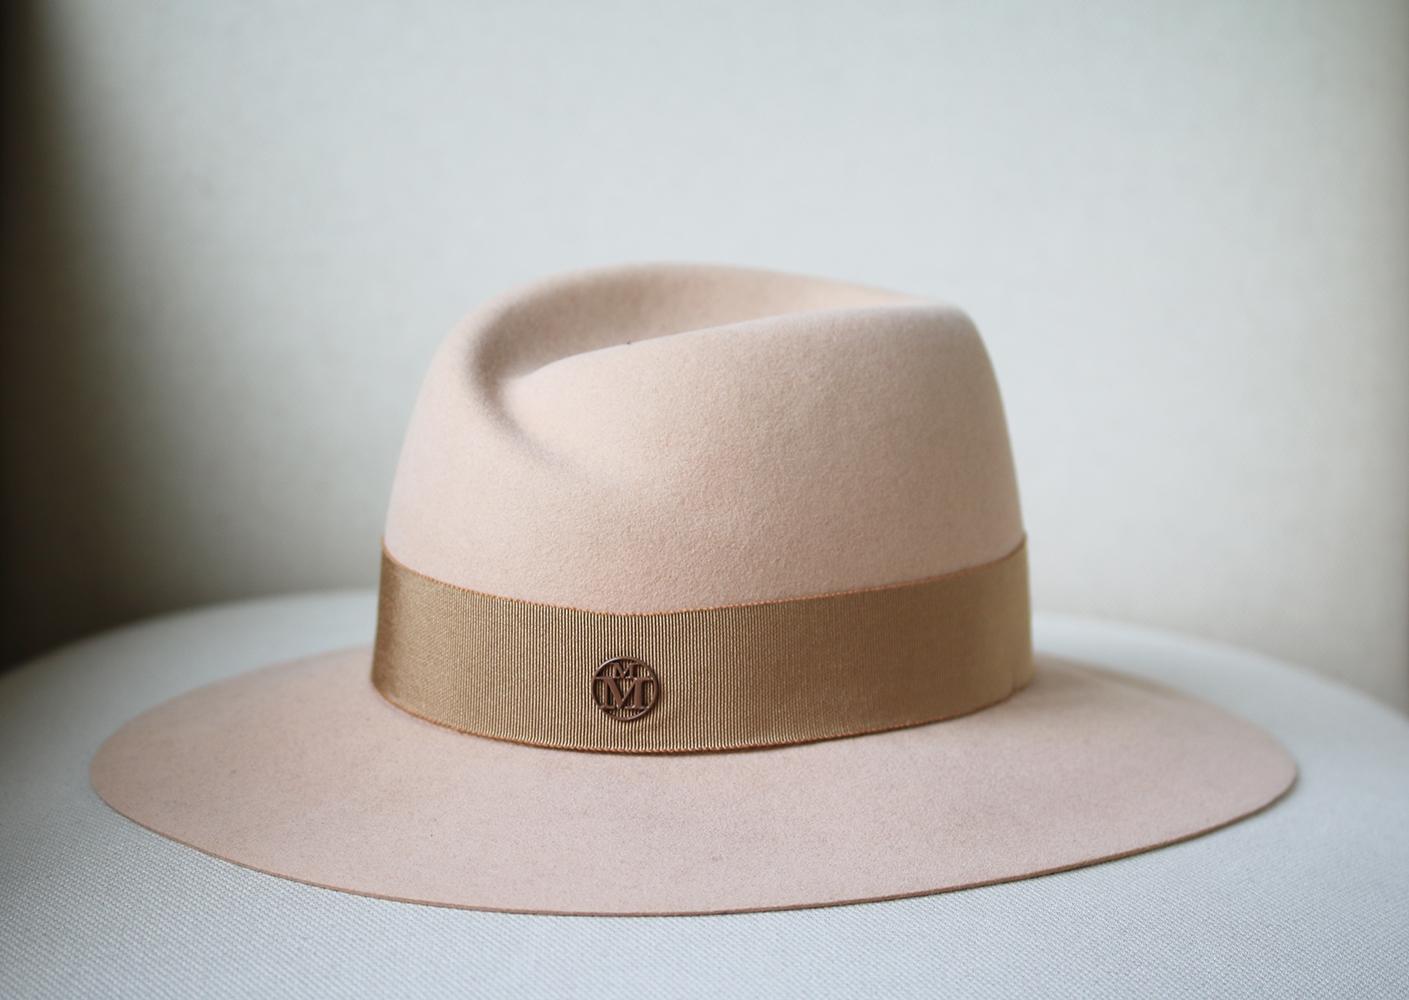 Swap your classic black fedora for Maison Michel's pretty light brown/beige 'Virginie' style. It's handcrafted from soft rabbit-felt and is trimmed with a tonal grosgrain ribbon. Light brown/beige rabbit-felt. 100% rabbit-felt; trim: 100% cotton.